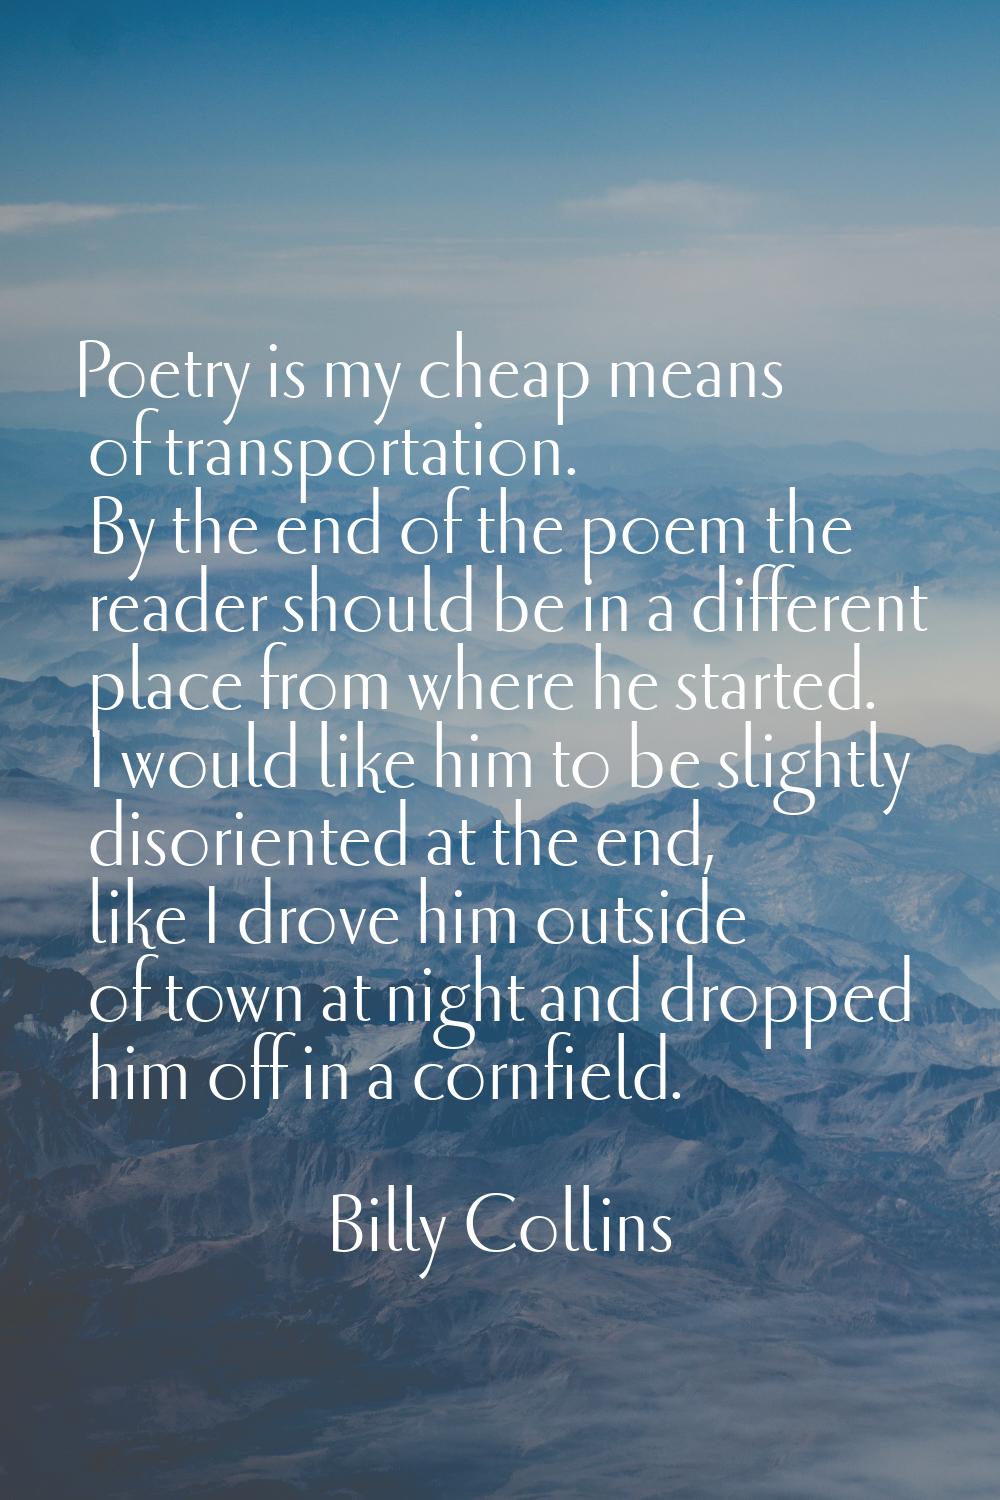 Poetry is my cheap means of transportation. By the end of the poem the reader should be in a differ